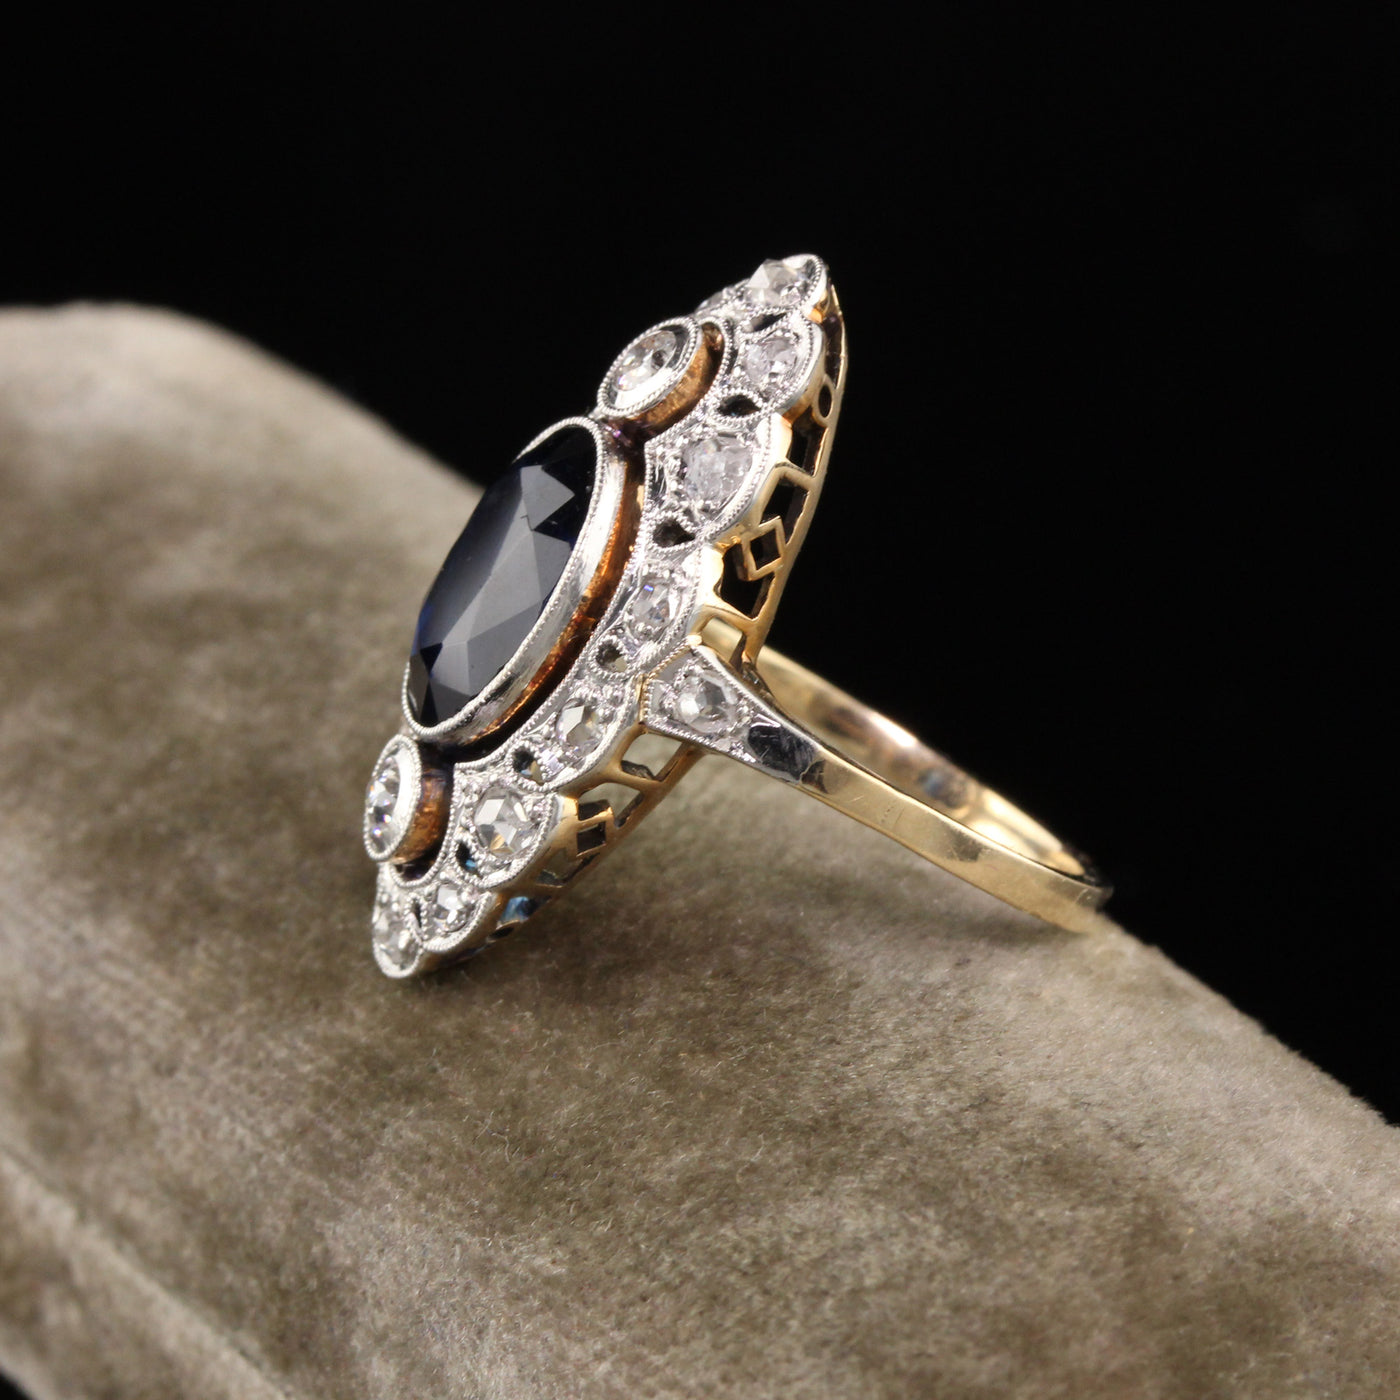 Antique Art Deco 14K Yellow Gold and Platinum Diamond and Sapphire Ring